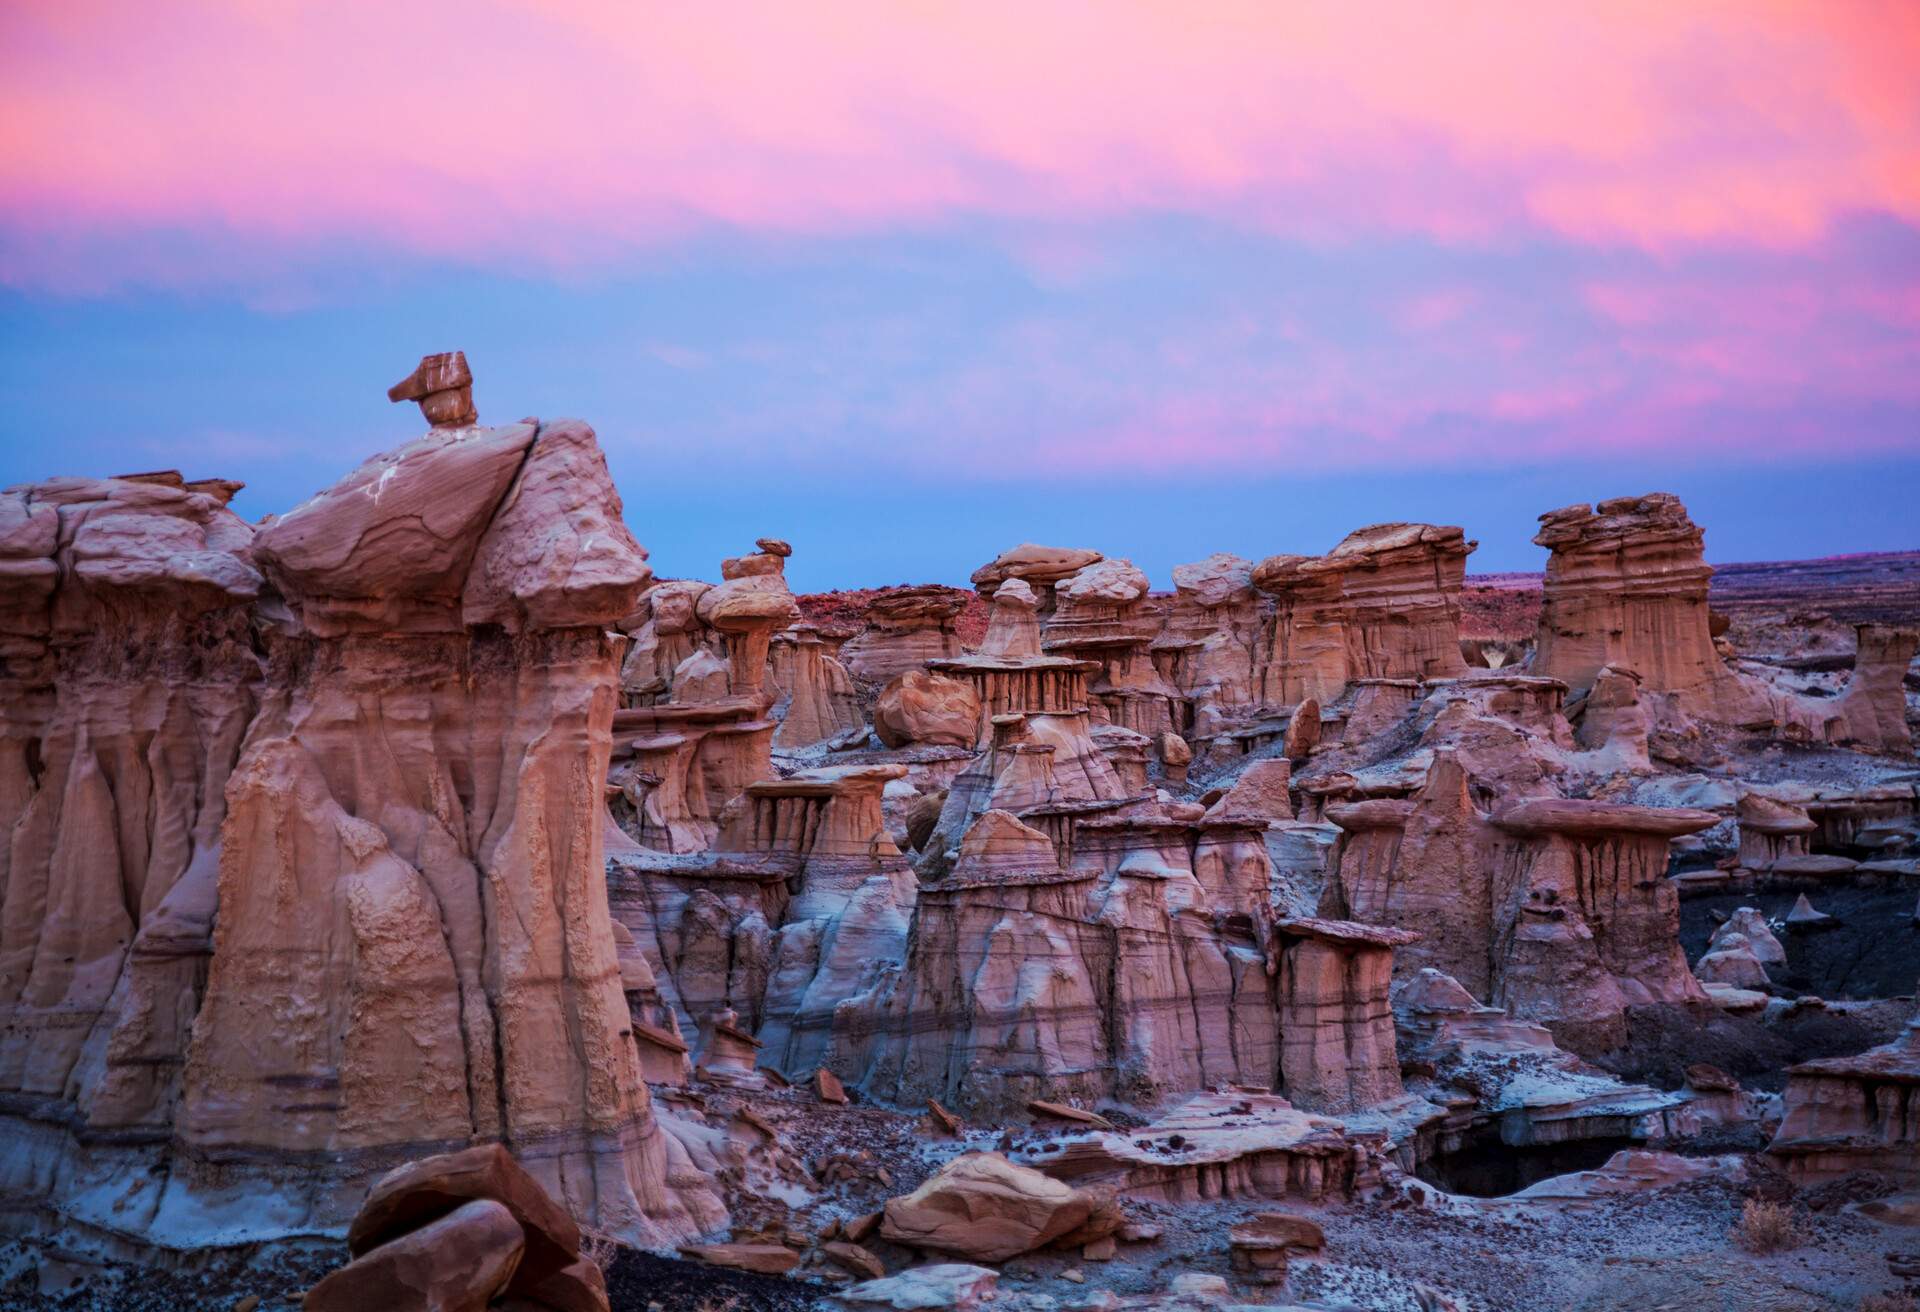 sunset augments the badlands landscape of Ah Shi Sle Pah wilderness in New Mexico